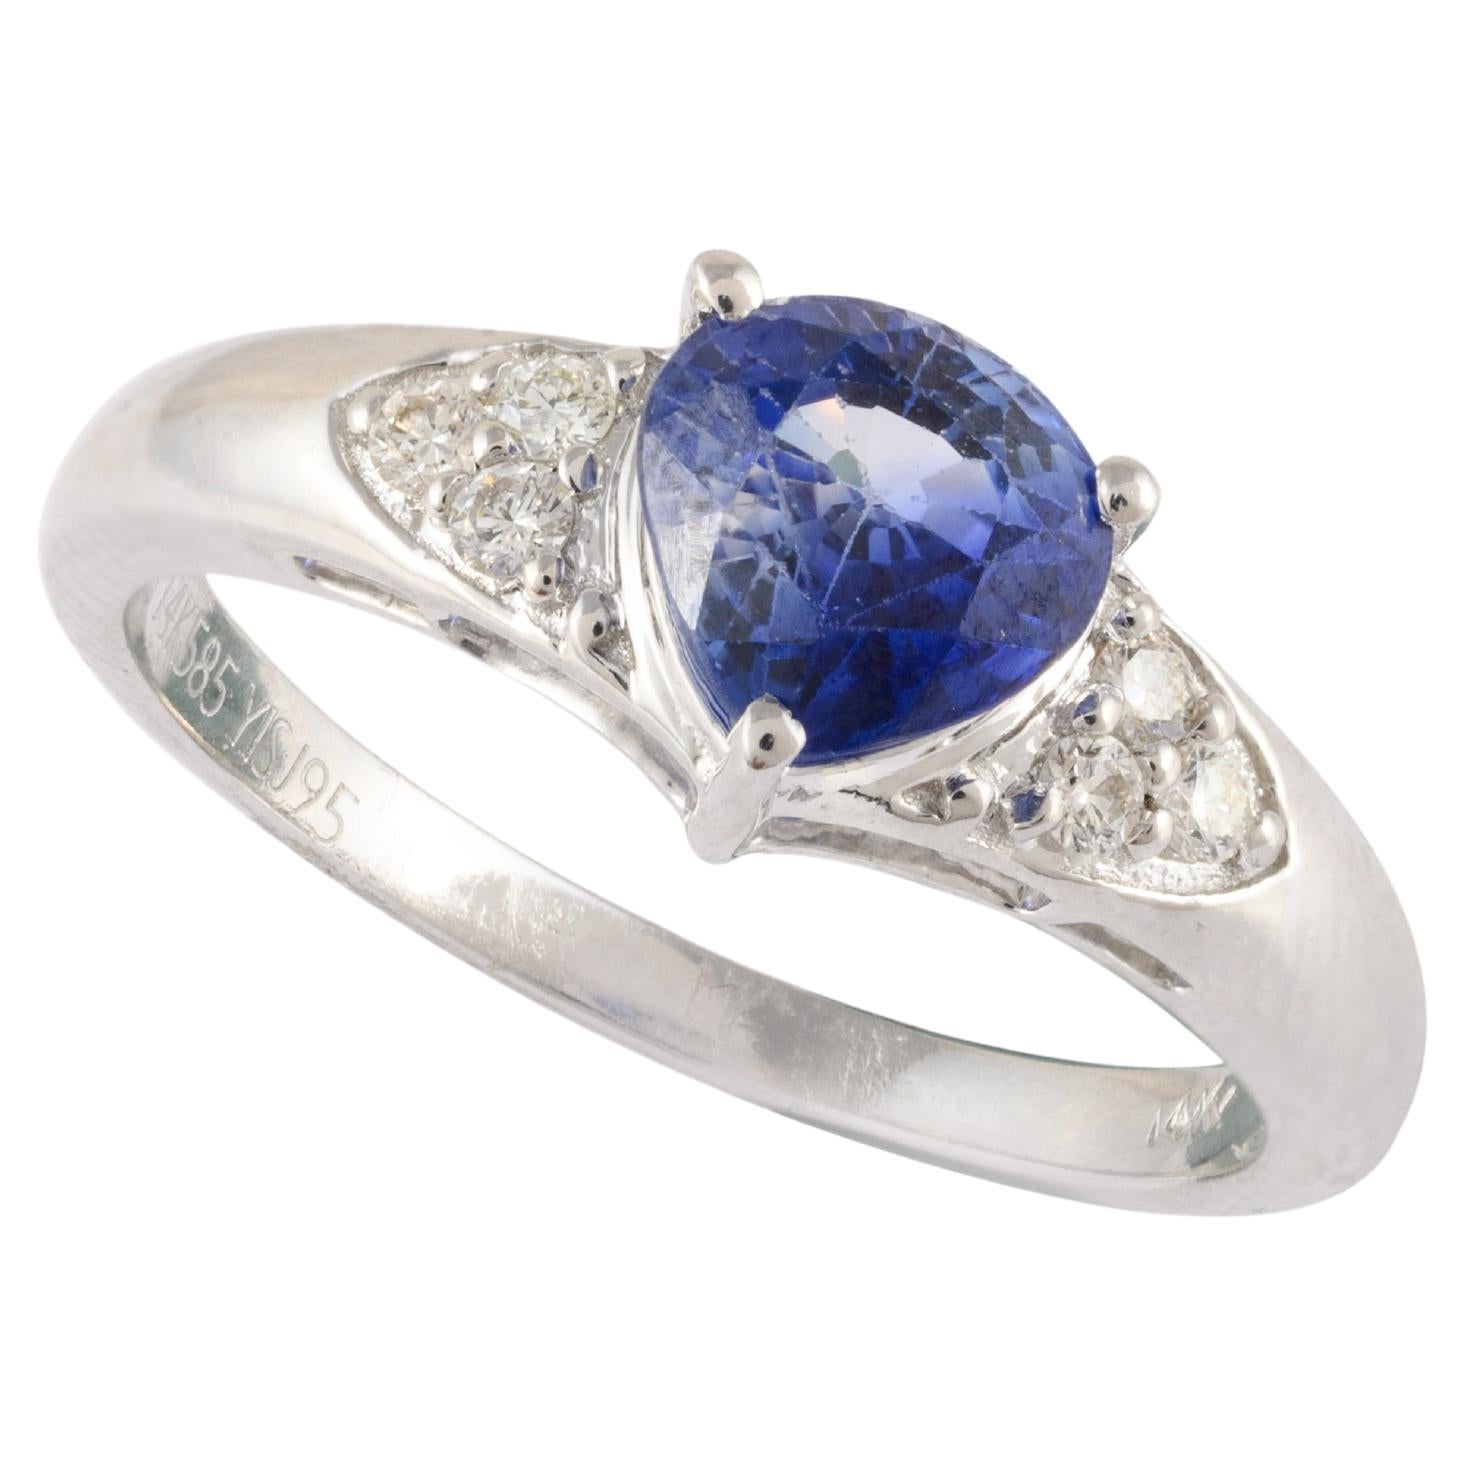 For Sale:  14k White Gold Trillion Cut Sapphire Birthstone Engagement Ring with Diamonds